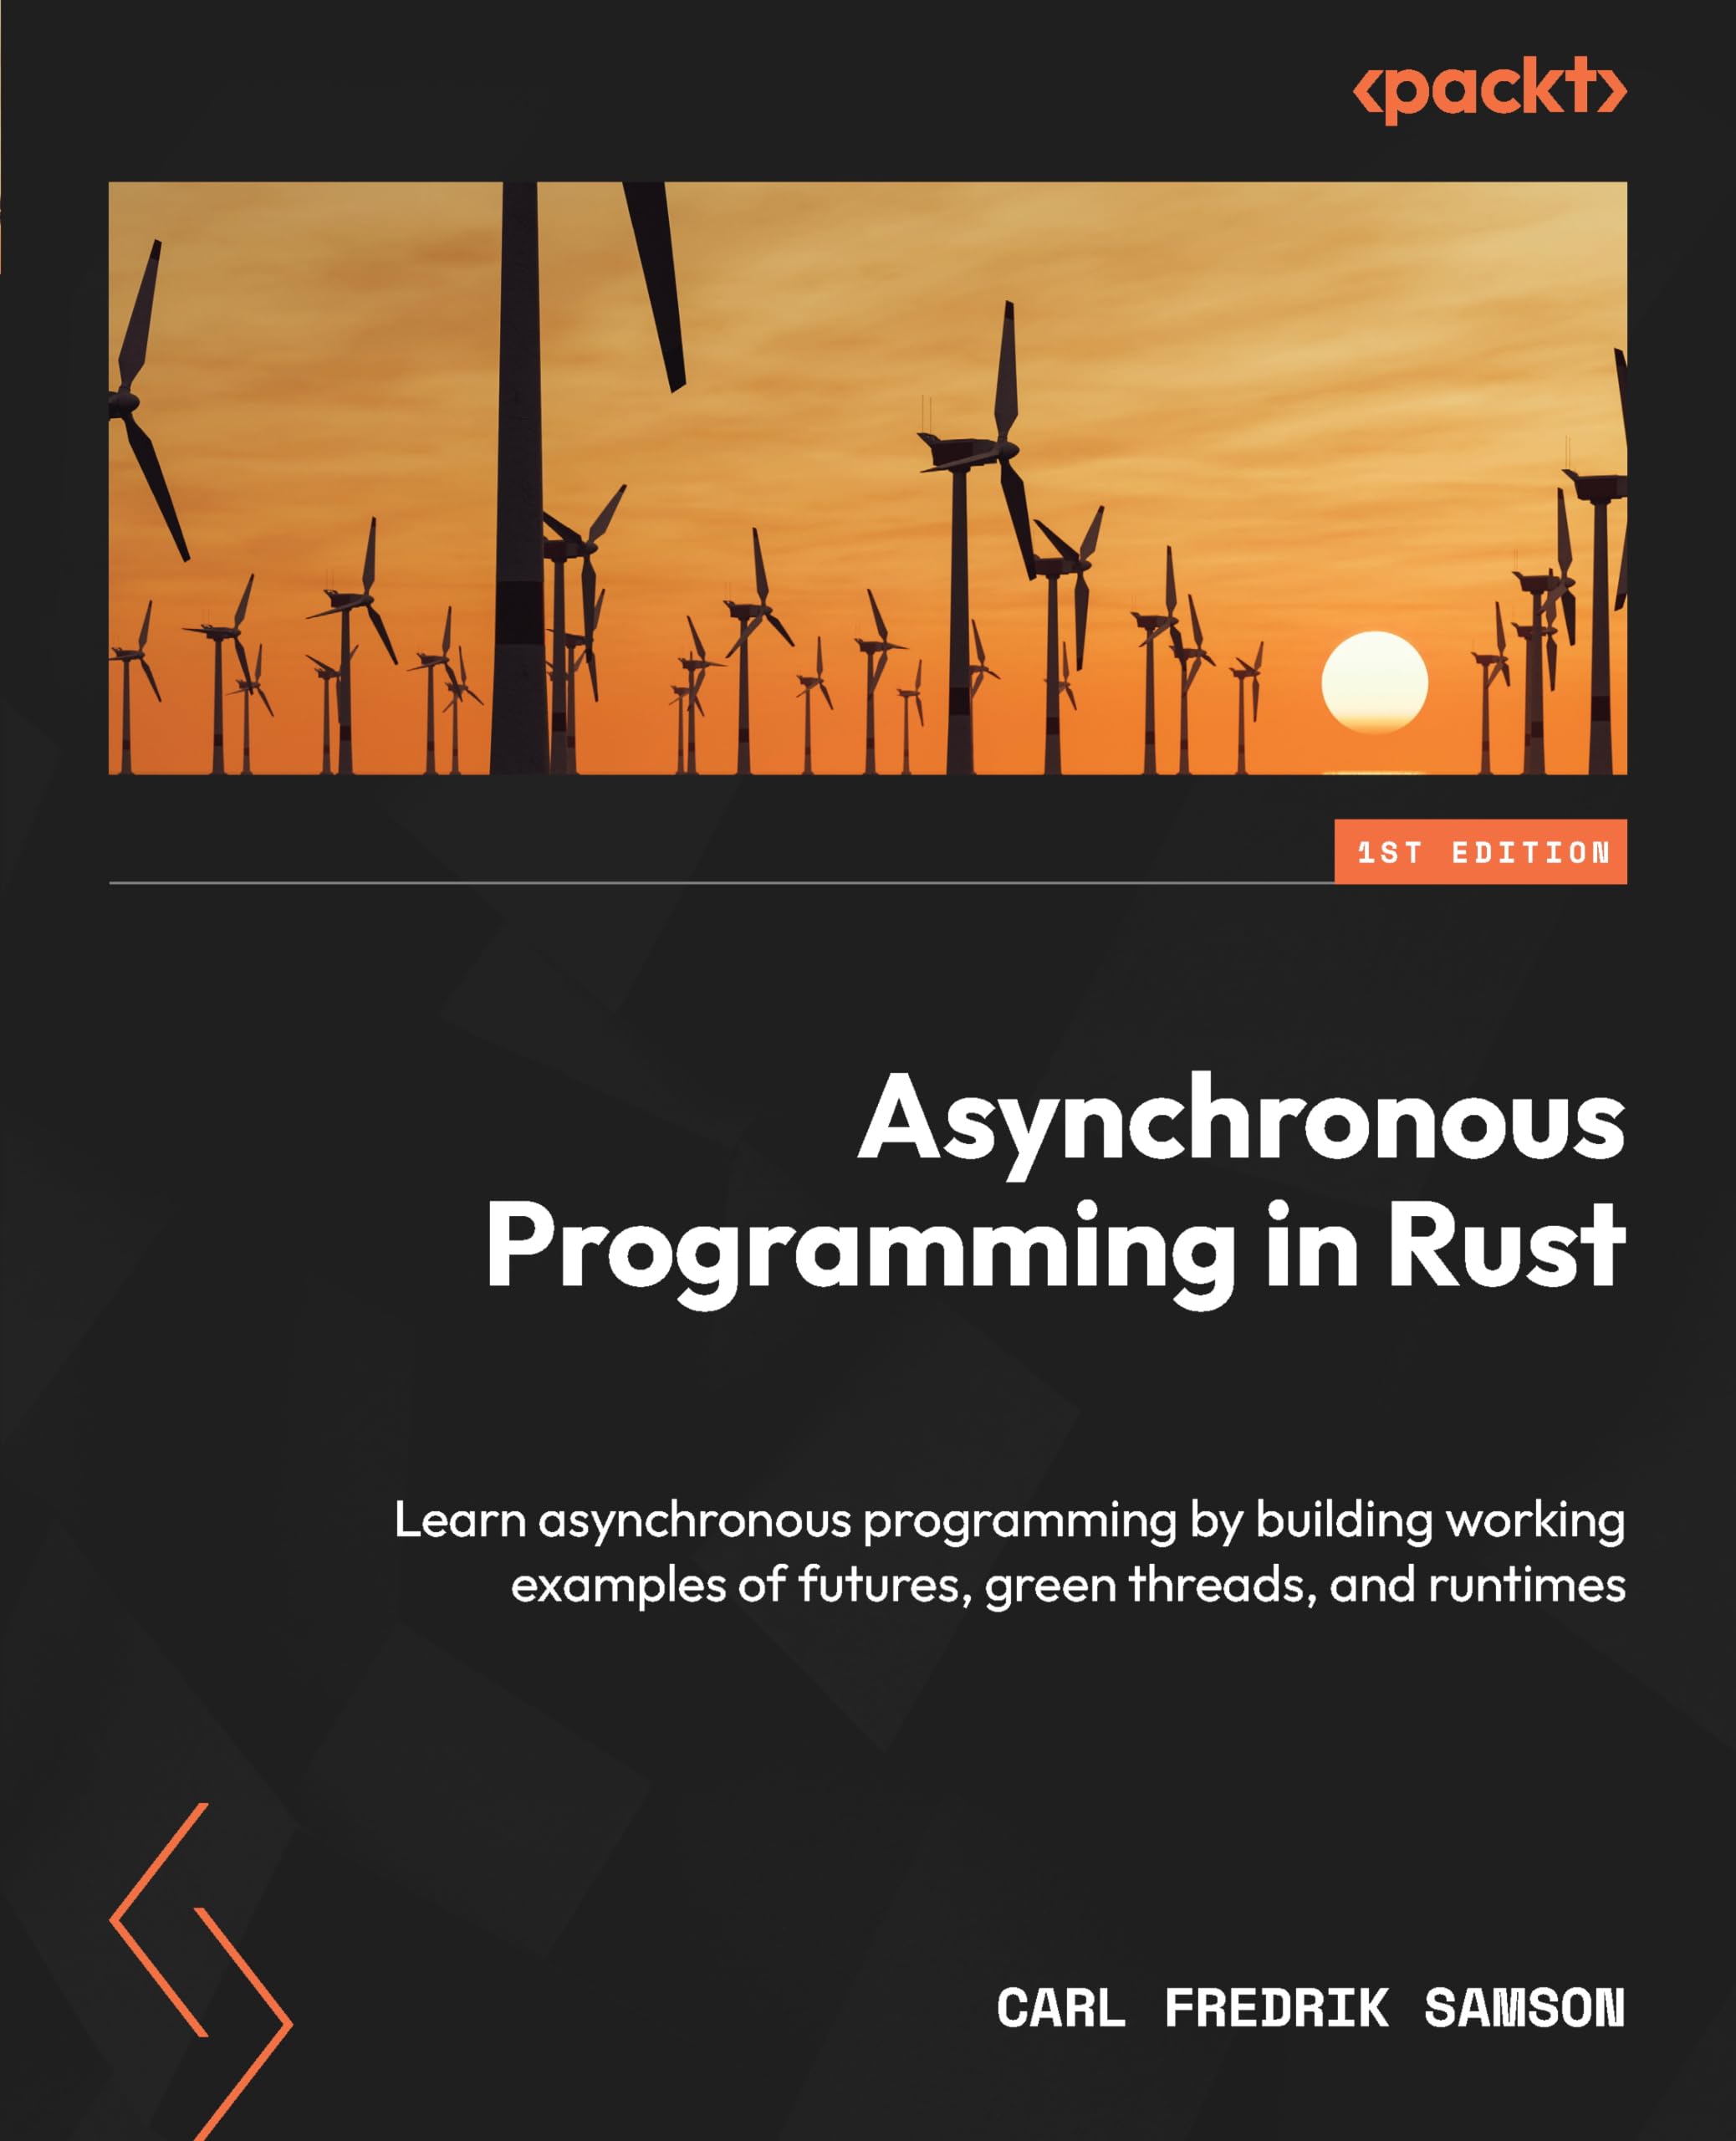 Asynchronous Programming in Rust